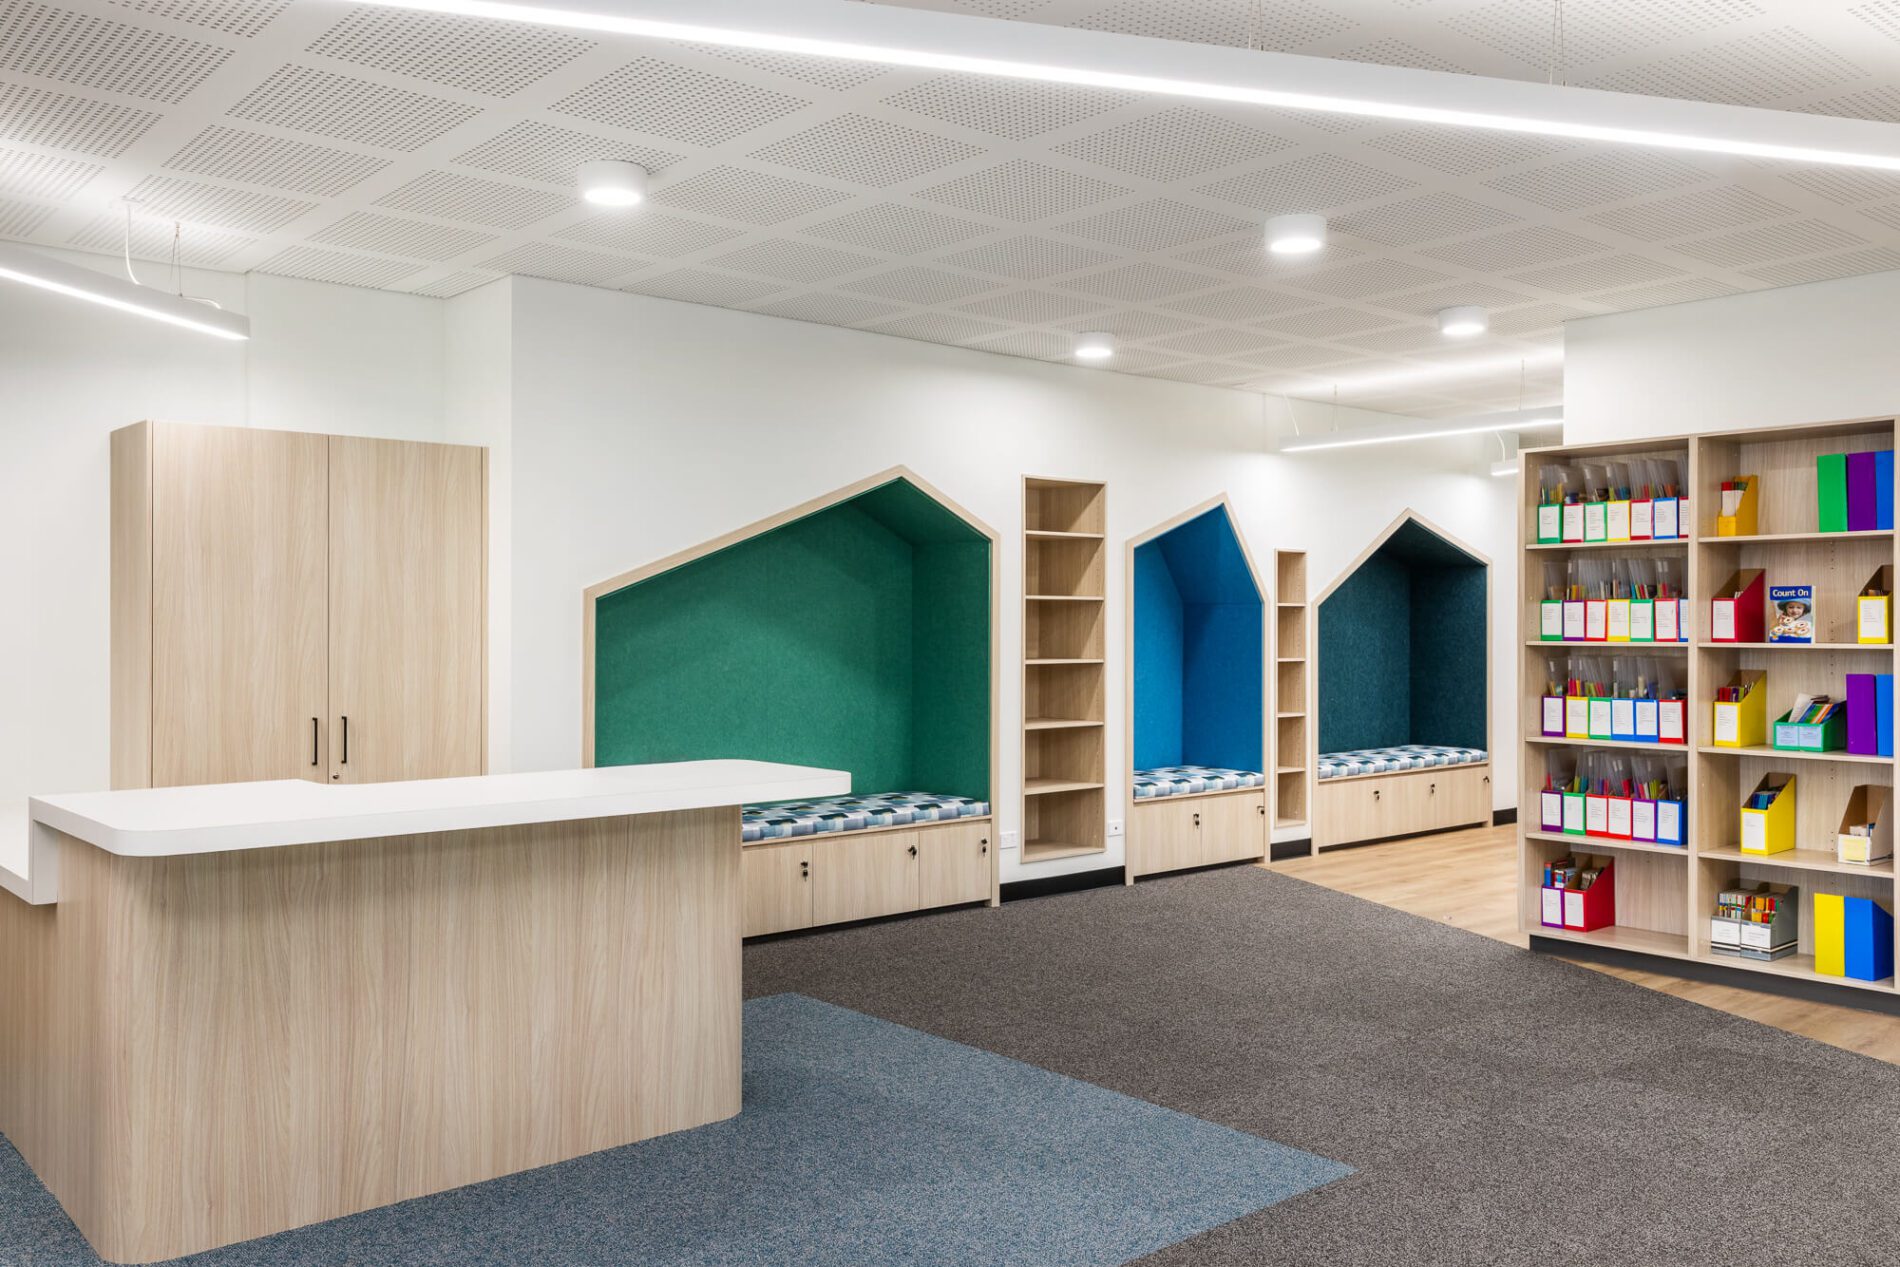 Coloured cubby reading and regulation nooks in playful asymetric house shapes, storage shelving and teacher's desk